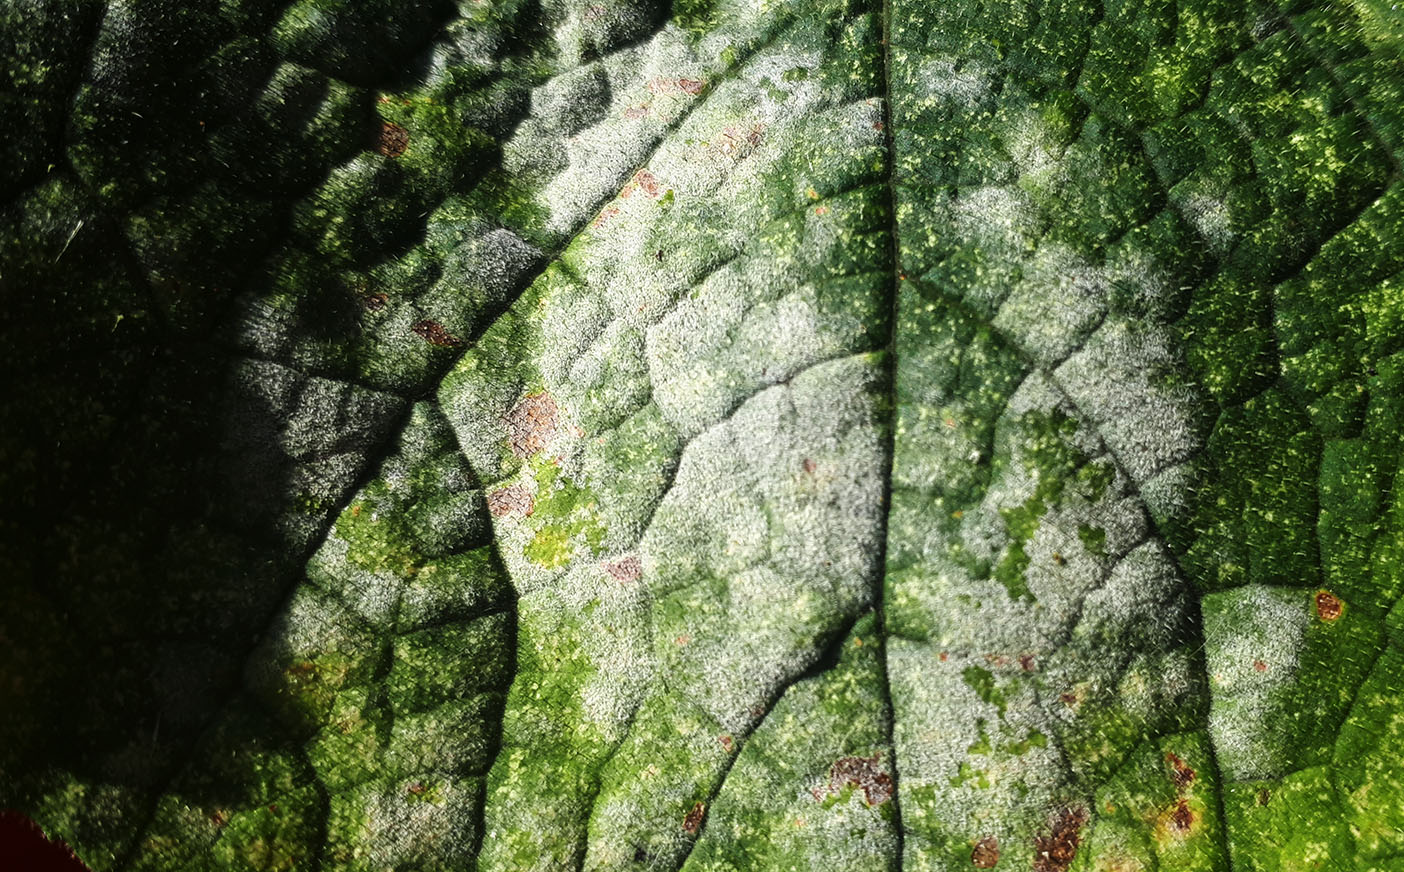 A mature squash leaf (note brown patches) with well developed powdery mildew